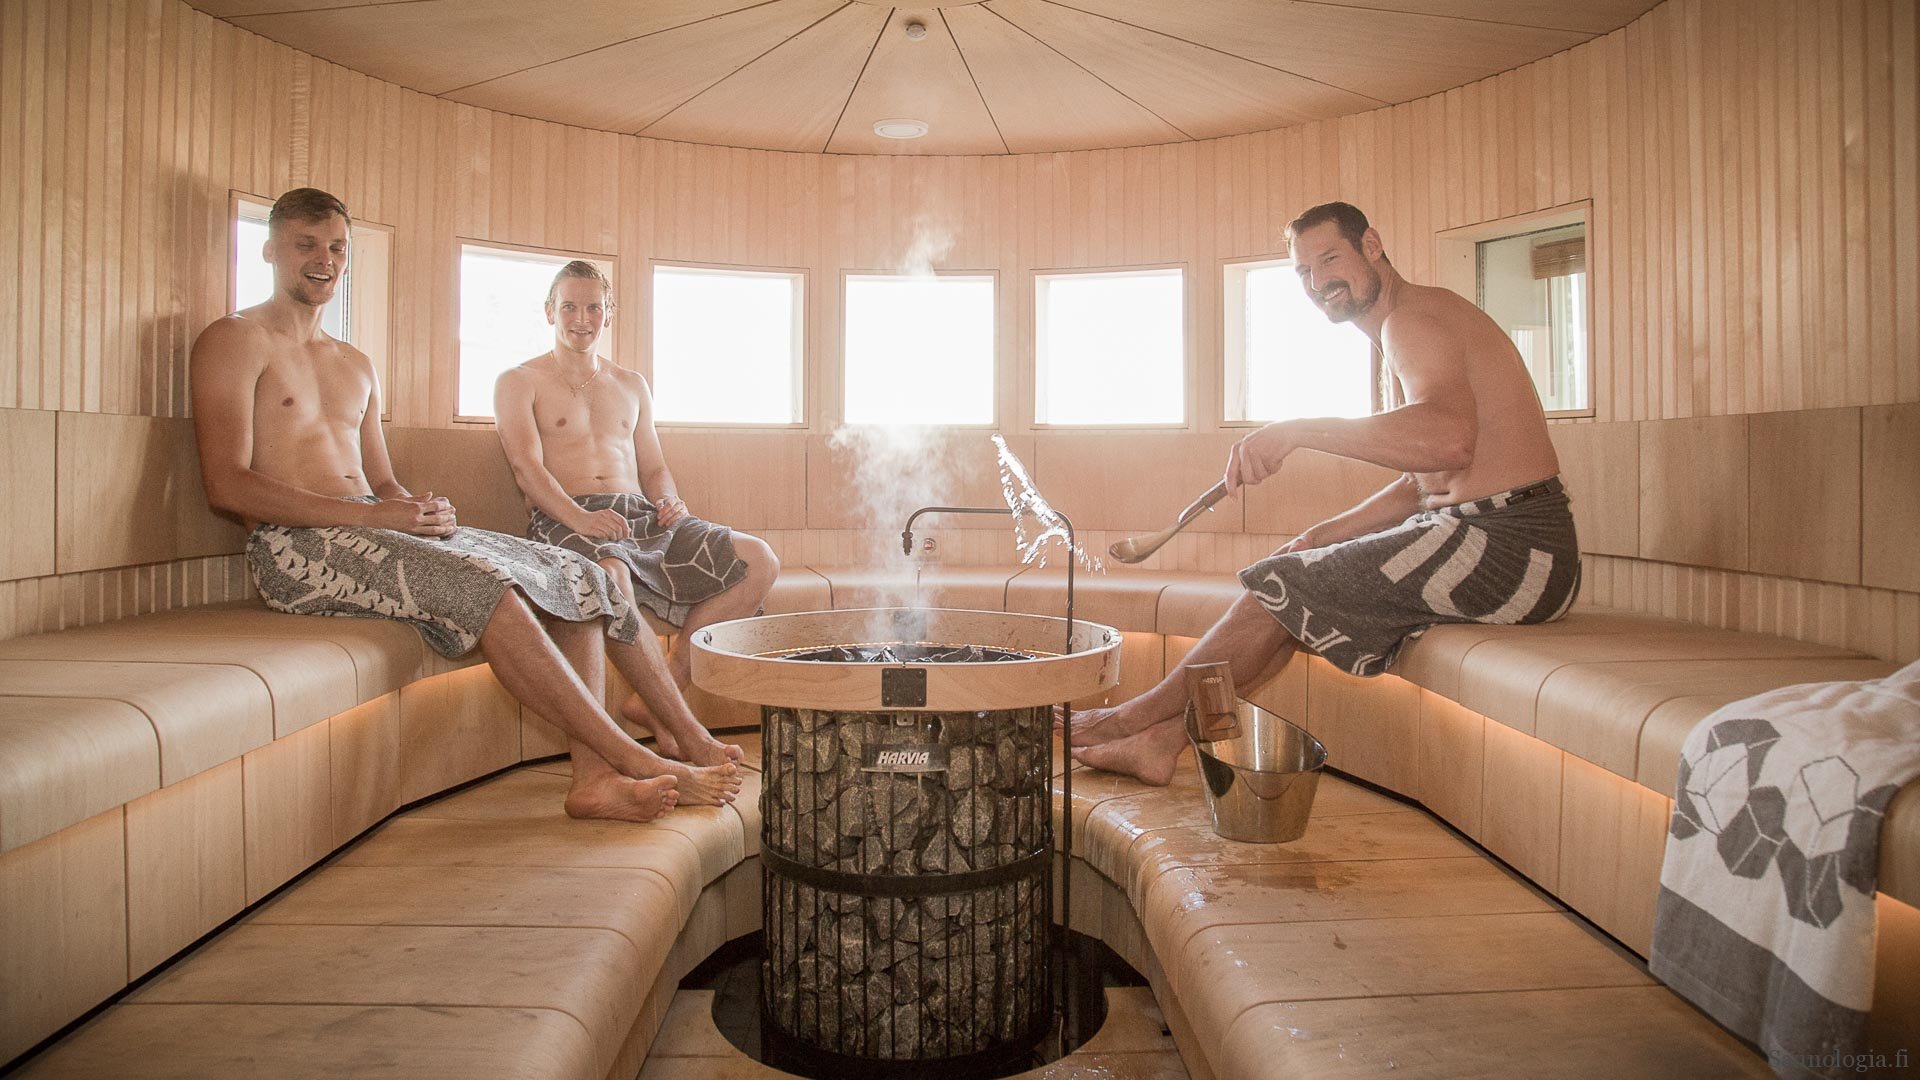 Three reasons why the health benefits of sauna only come with a proper sauna